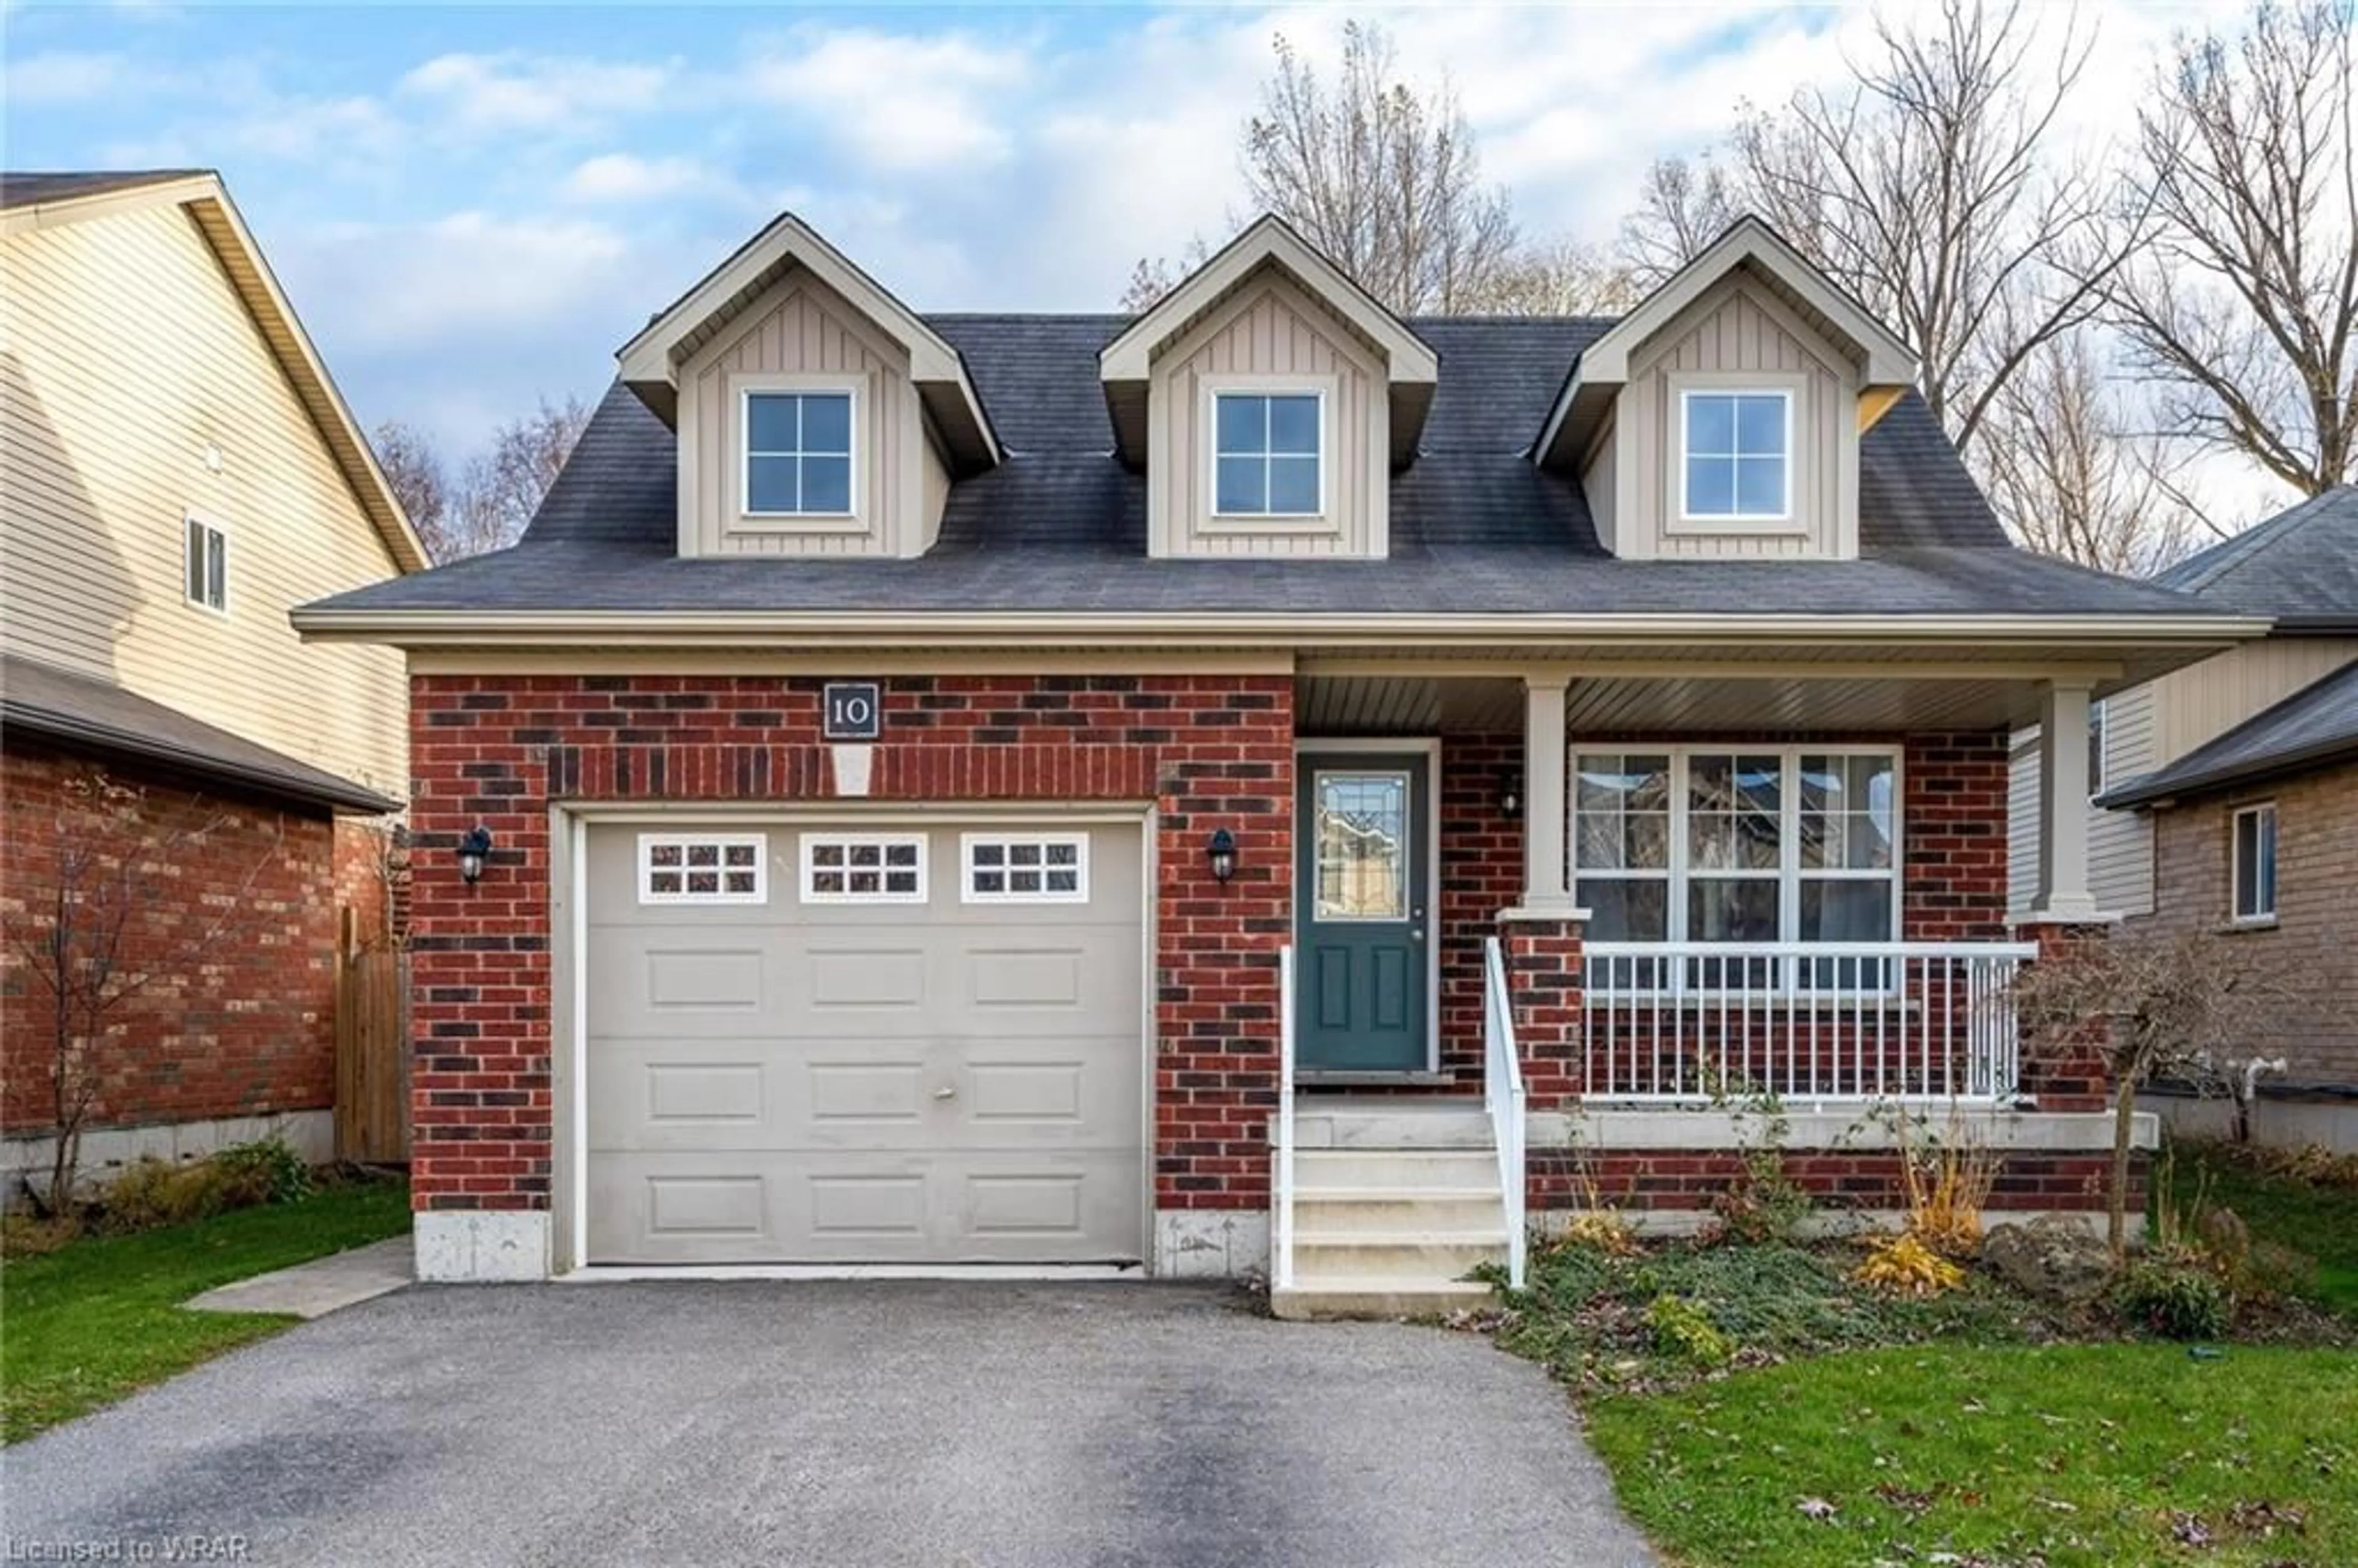 Home with brick exterior material for 10 Lynden St #Lower, Collingwood Ontario L9Y 0C1